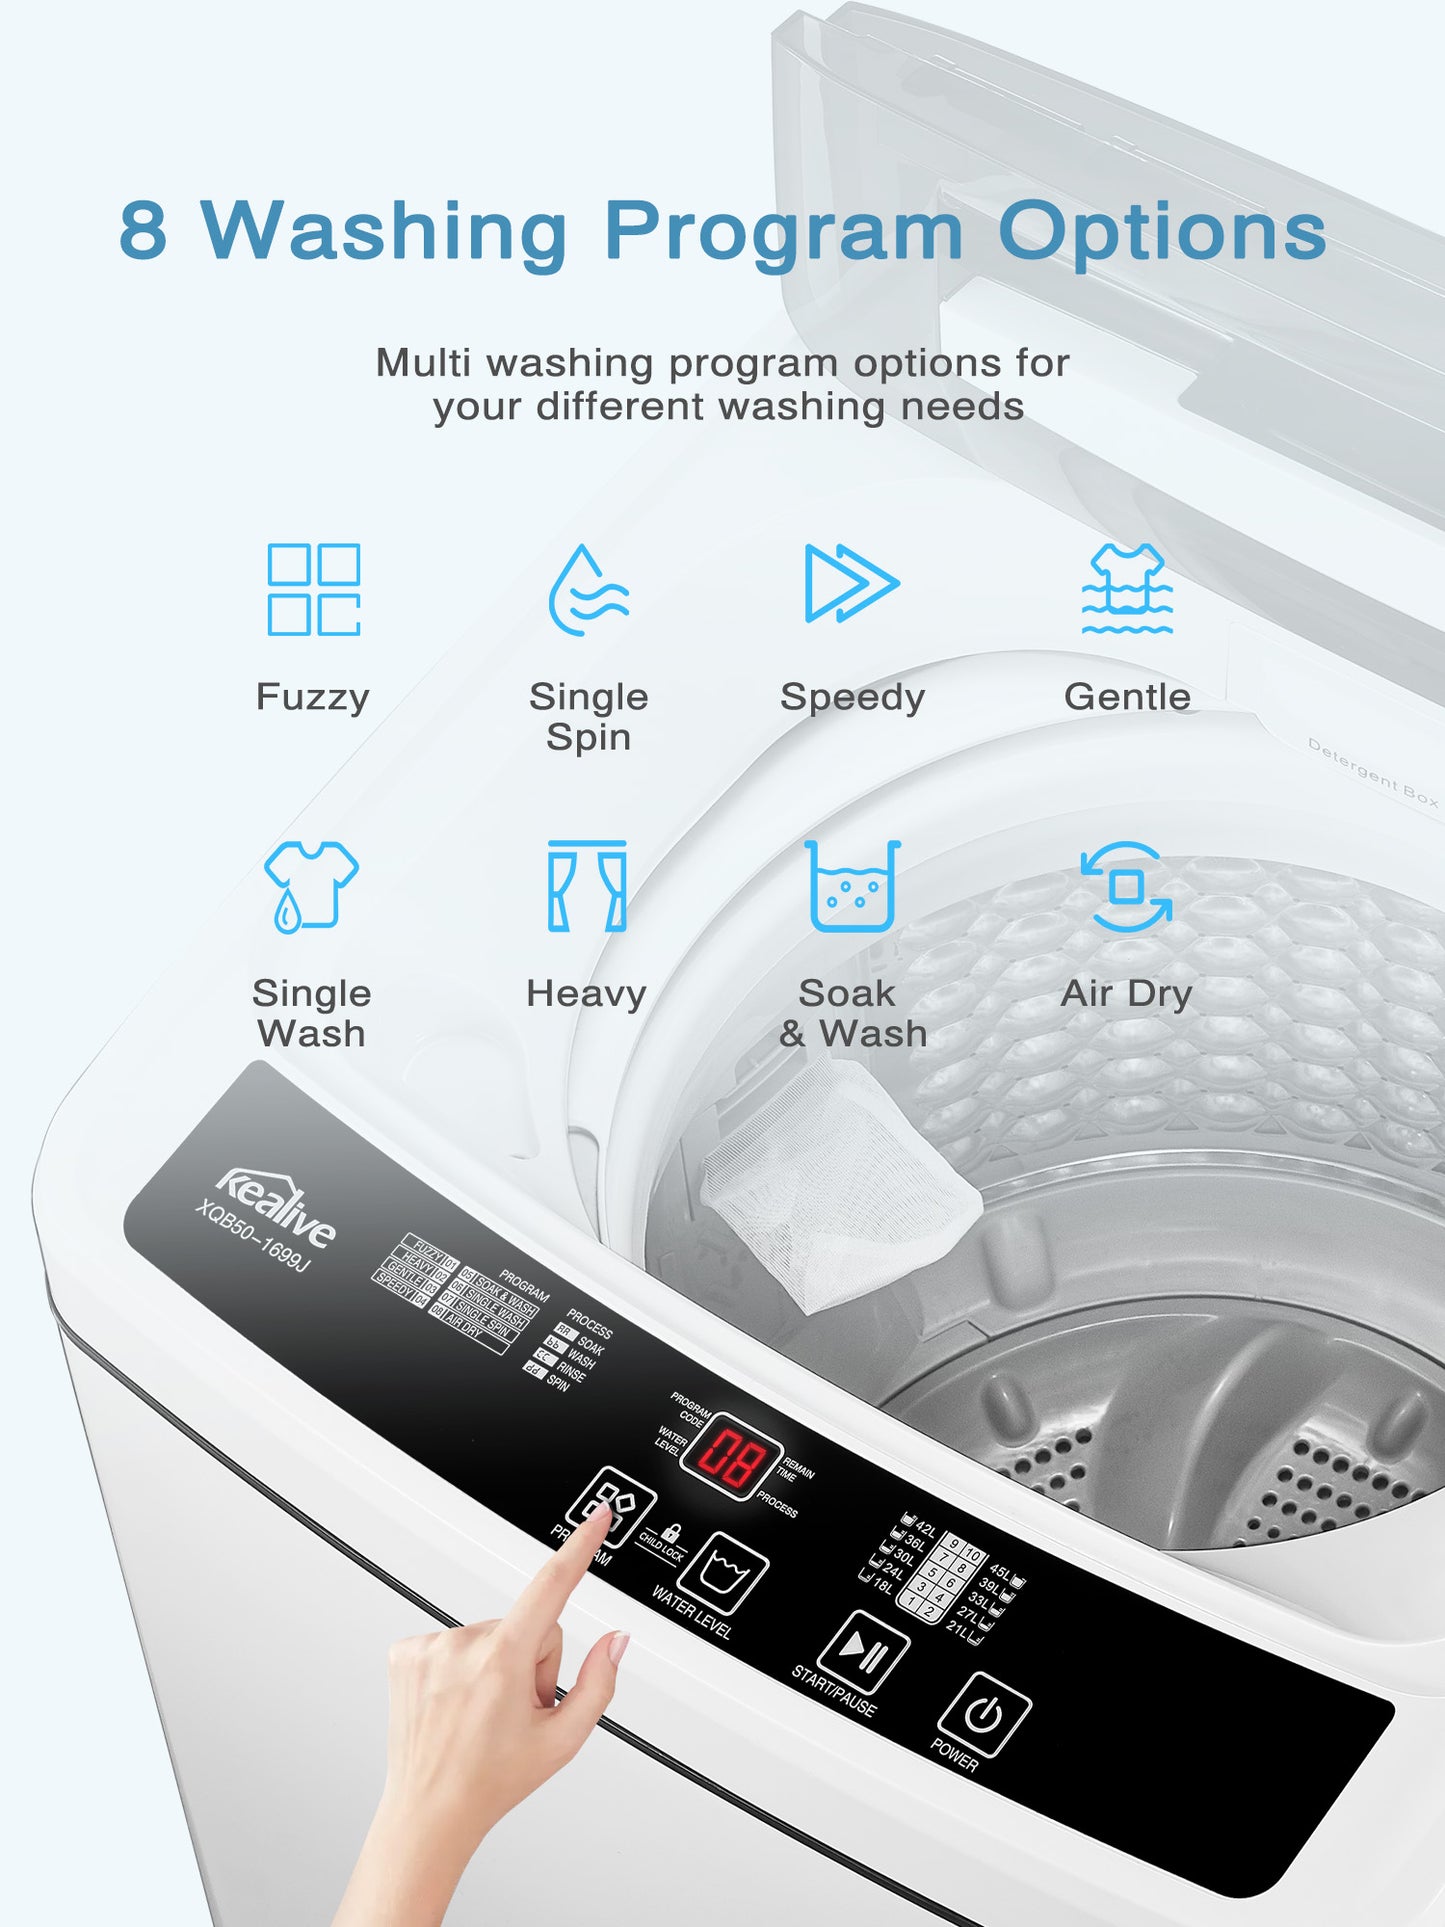 FOHERE Full Automatic Washing Machine, 1.5 Cubic feet 11 lbs Capacity Portable Machine, 8 Programs 10 Water Levels Energy Saving Top Load Washer for Apartment Dorm